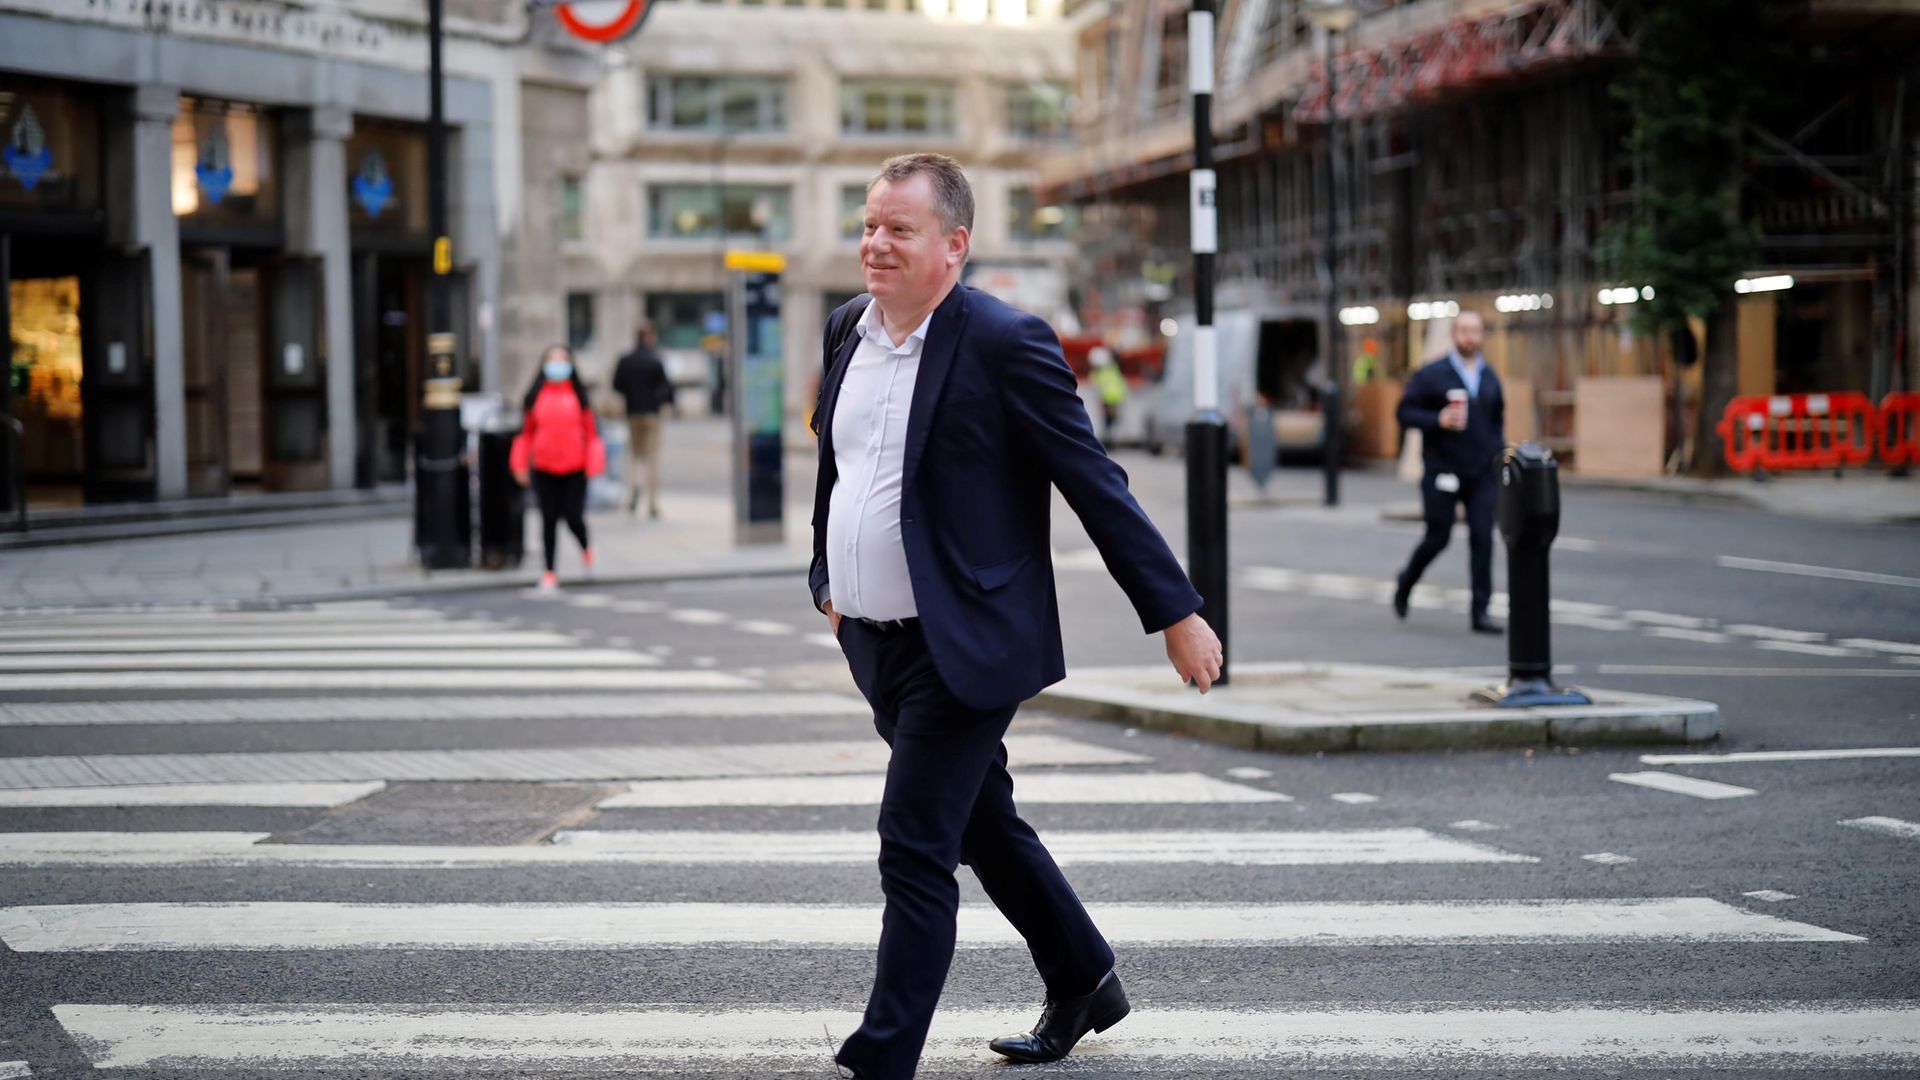 David Frost in central London at the height of negotiations on a post-Brexit trade deal with the EU, in October 2020. Photo: AFP via Getty Images